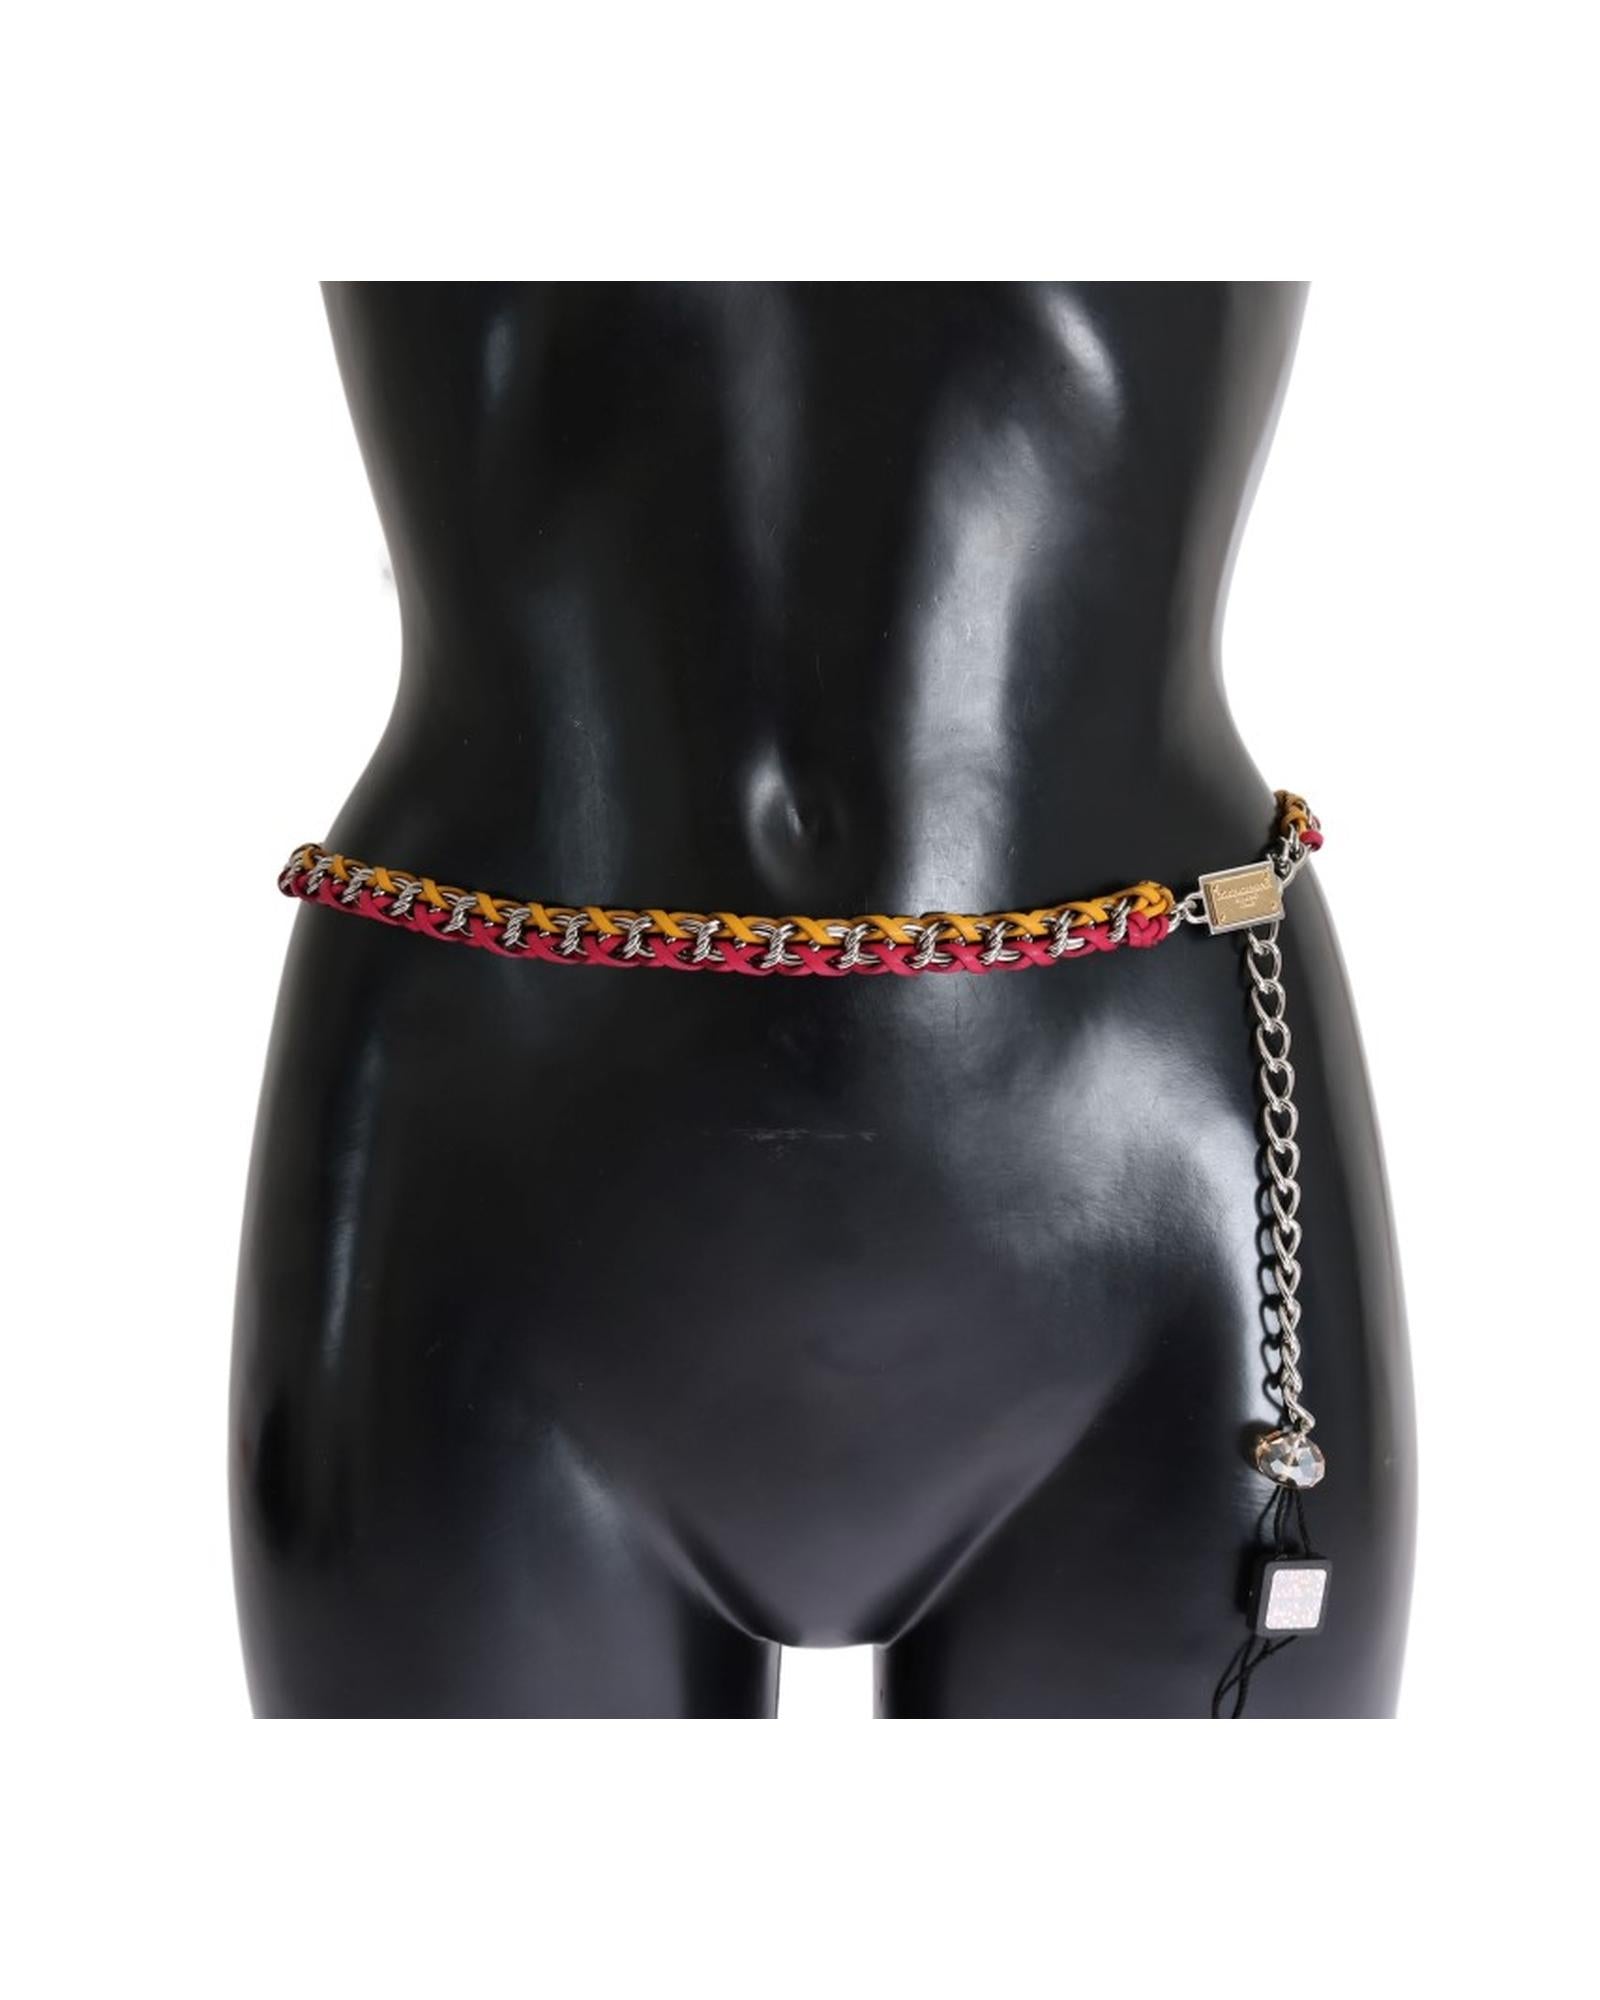 Brand New Dolce & Gabbana Belt with Crystal Detailing S Women